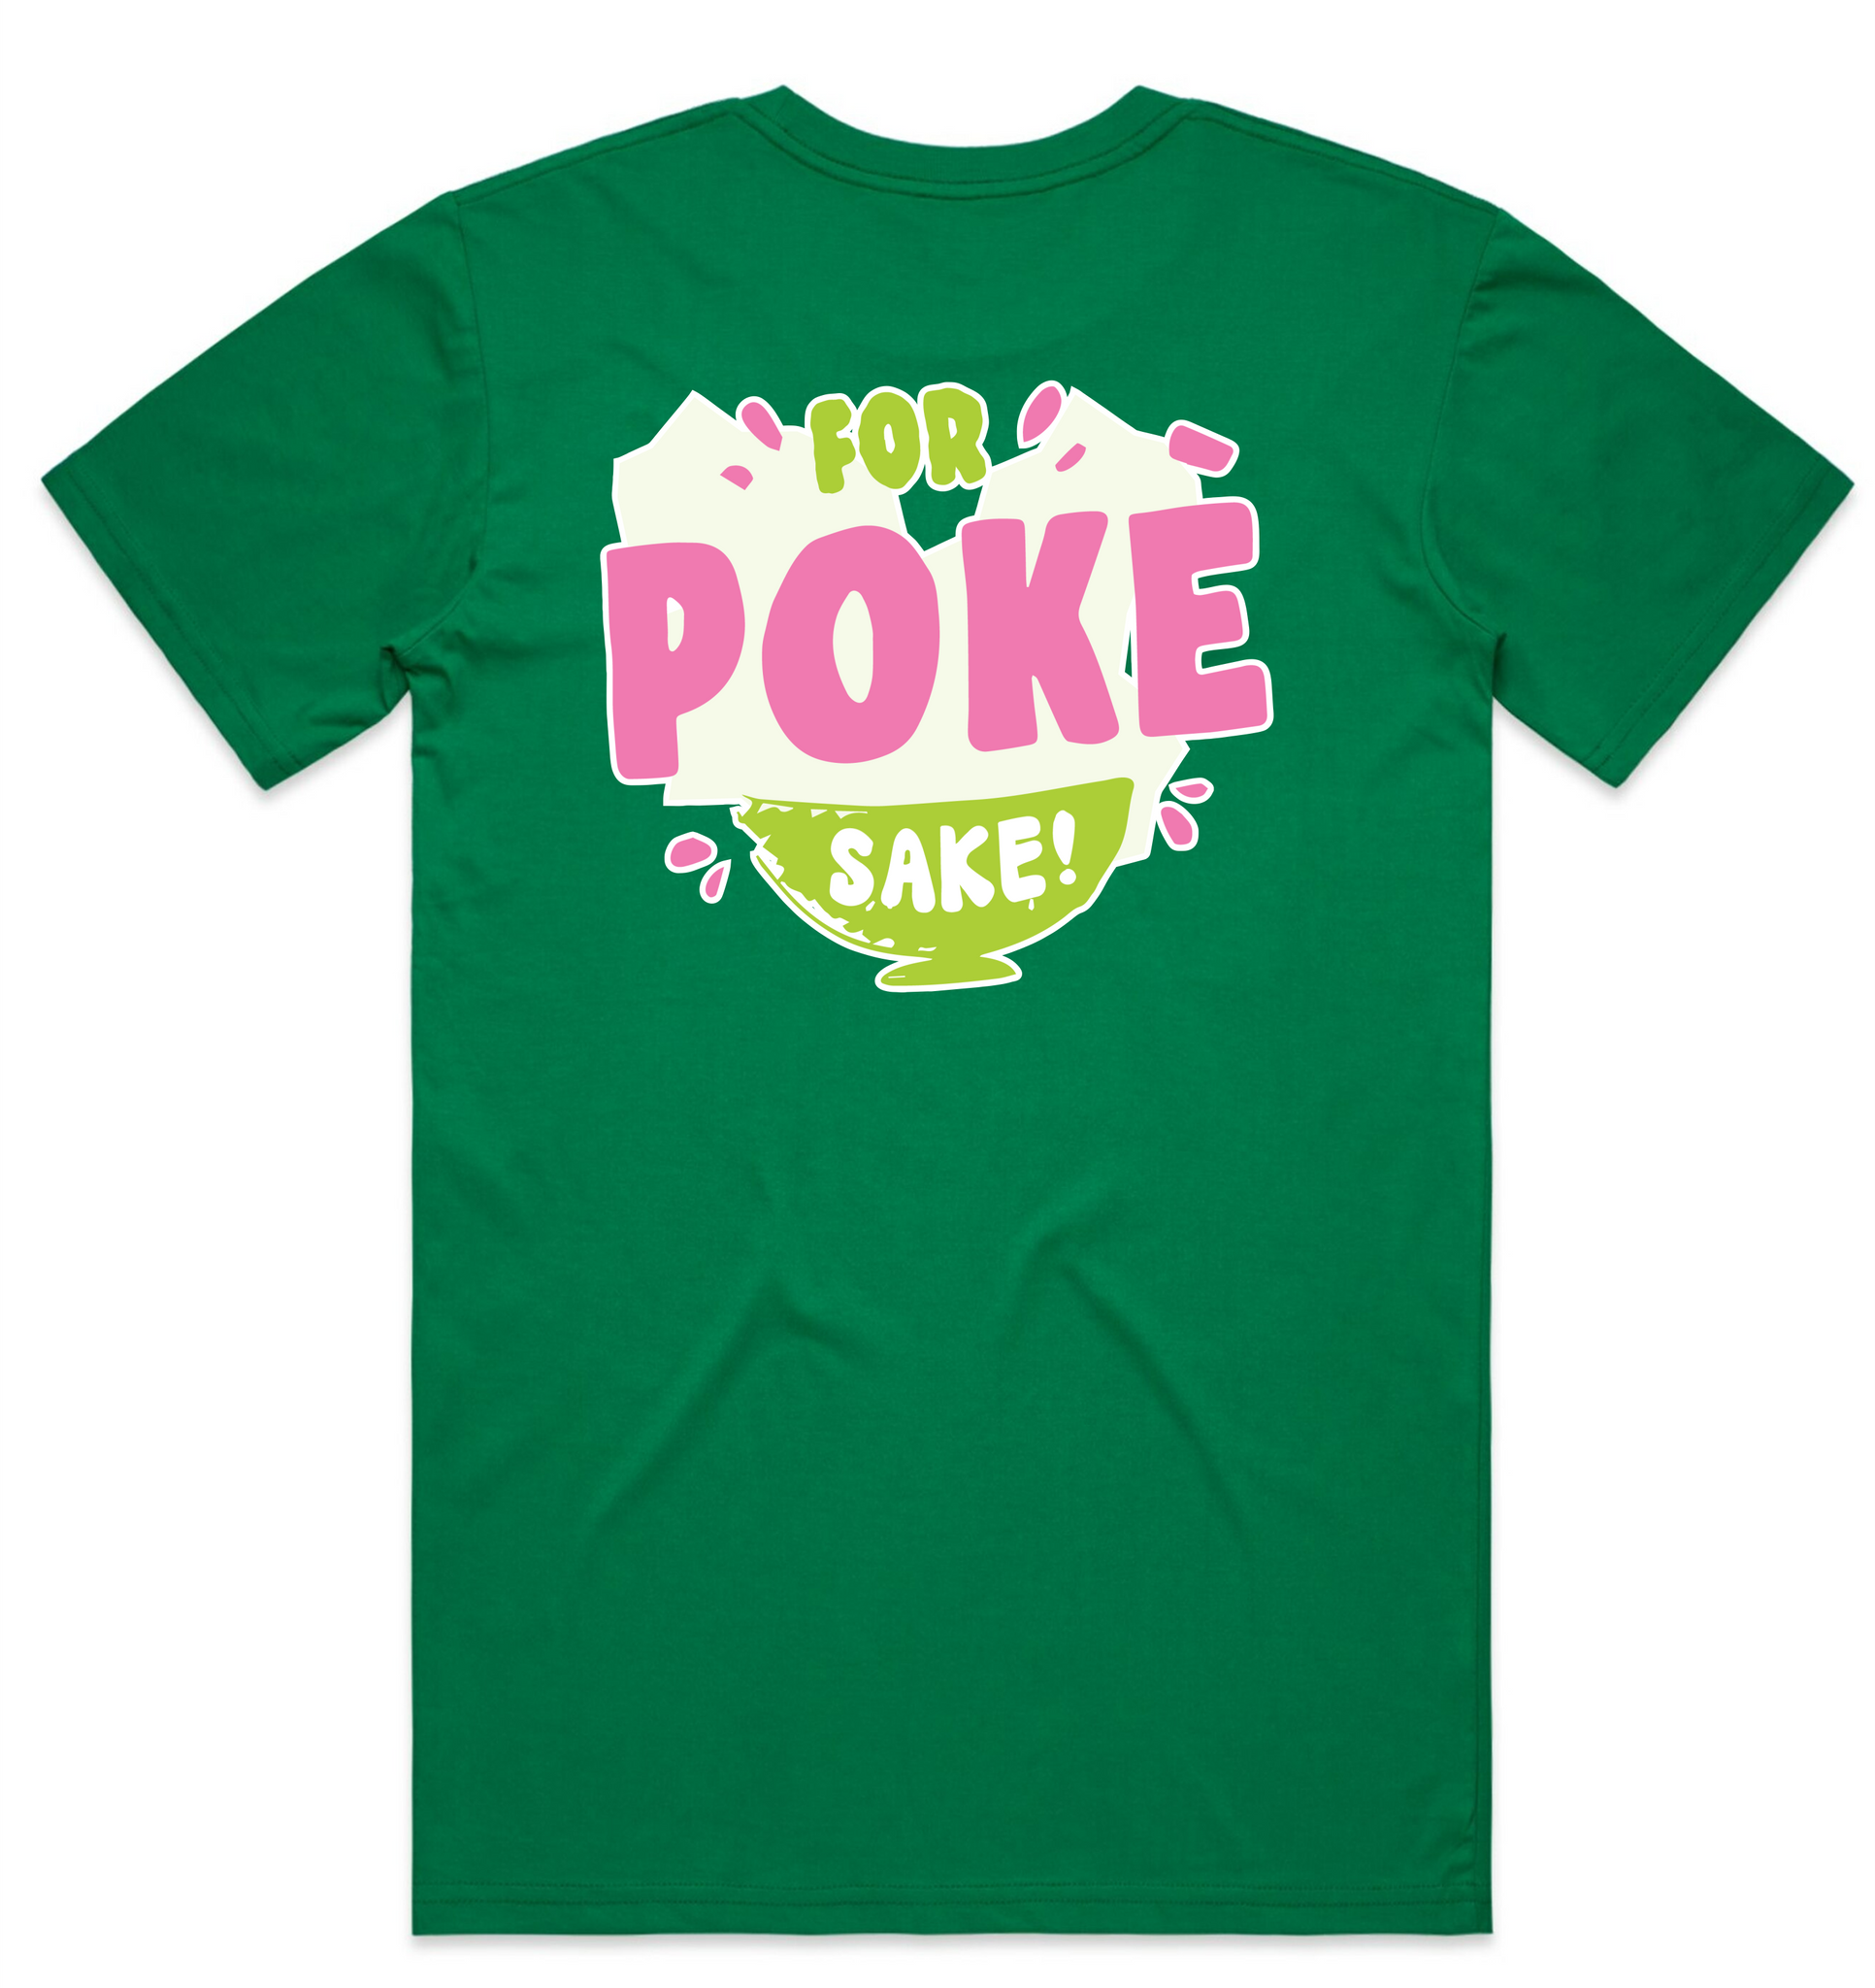 For Poke Sake - Front and Back -  Mens Tee